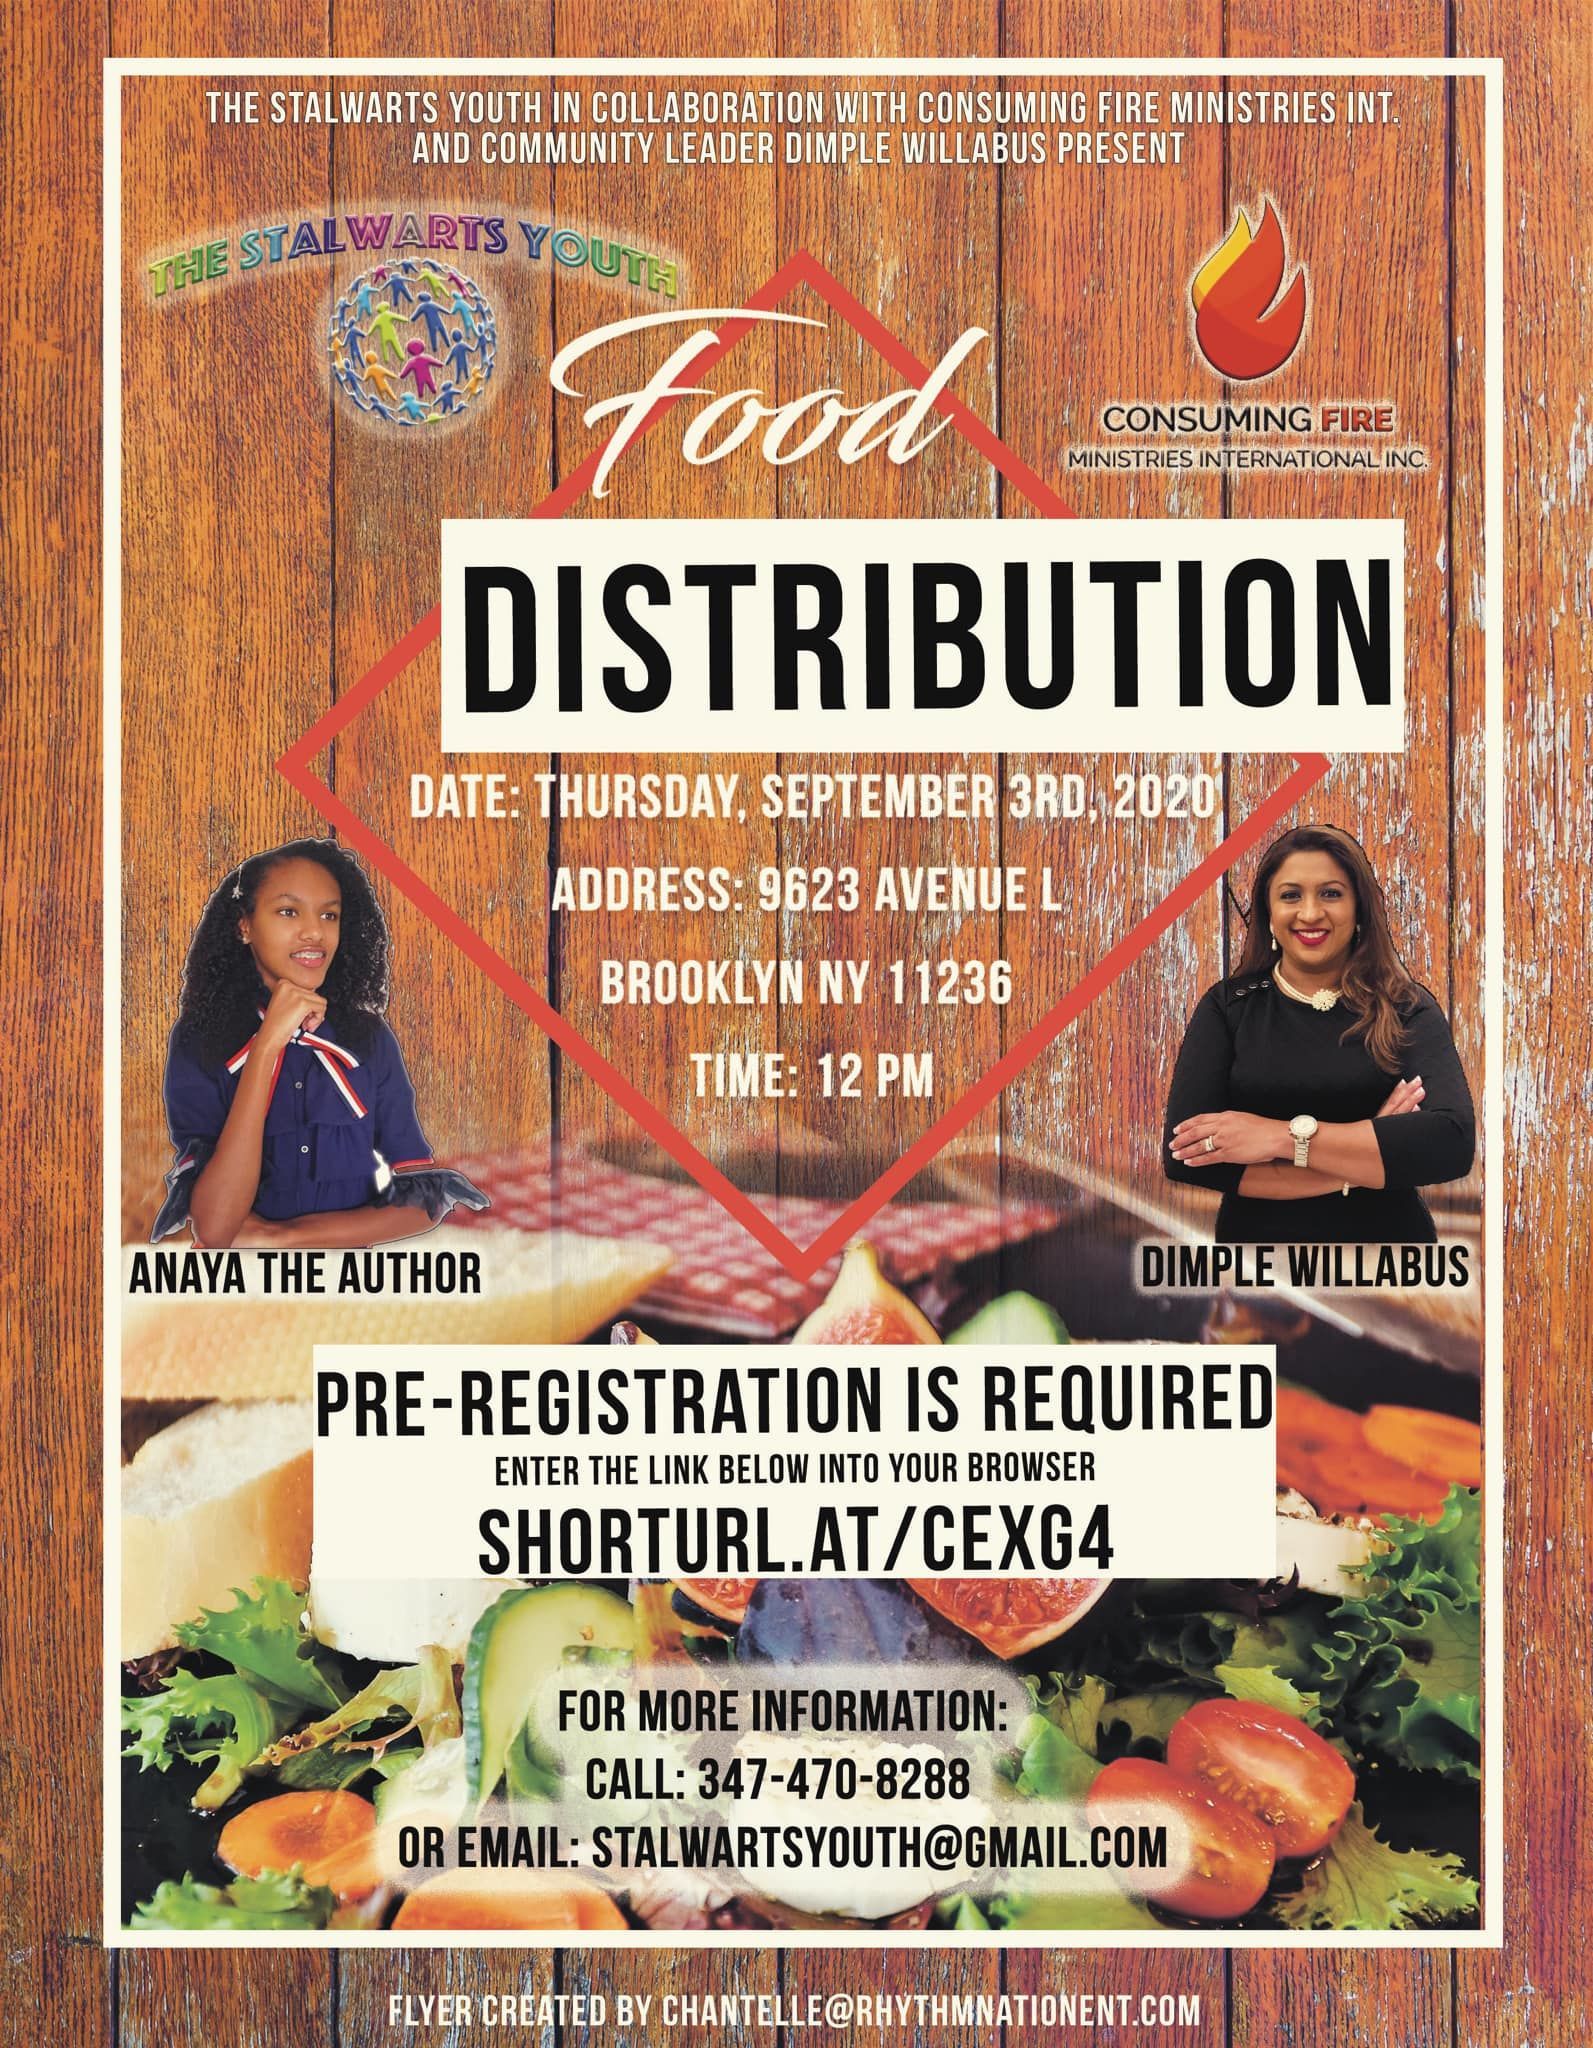 Stalwarts Youth Food Distribution in collaboration with Consuming Fire Ministries in Brooklyn, NY on September 3, 2020